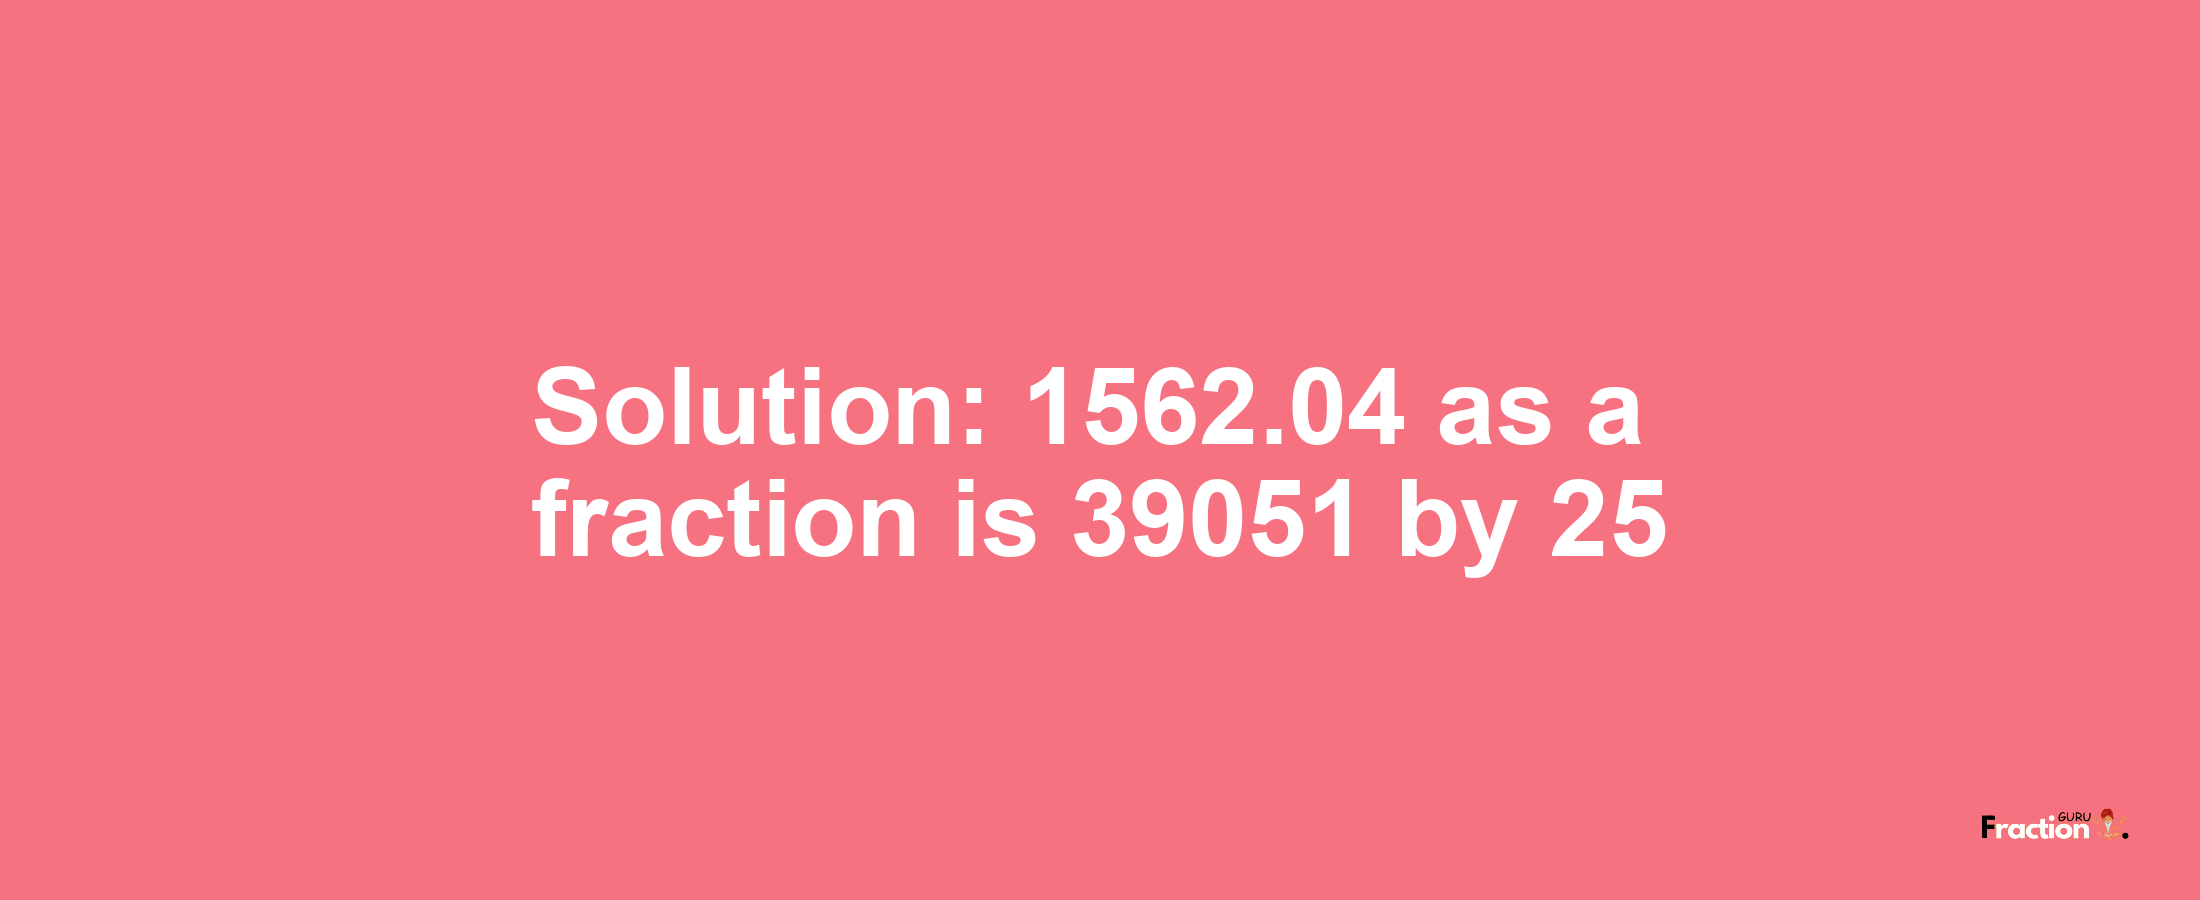 Solution:1562.04 as a fraction is 39051/25